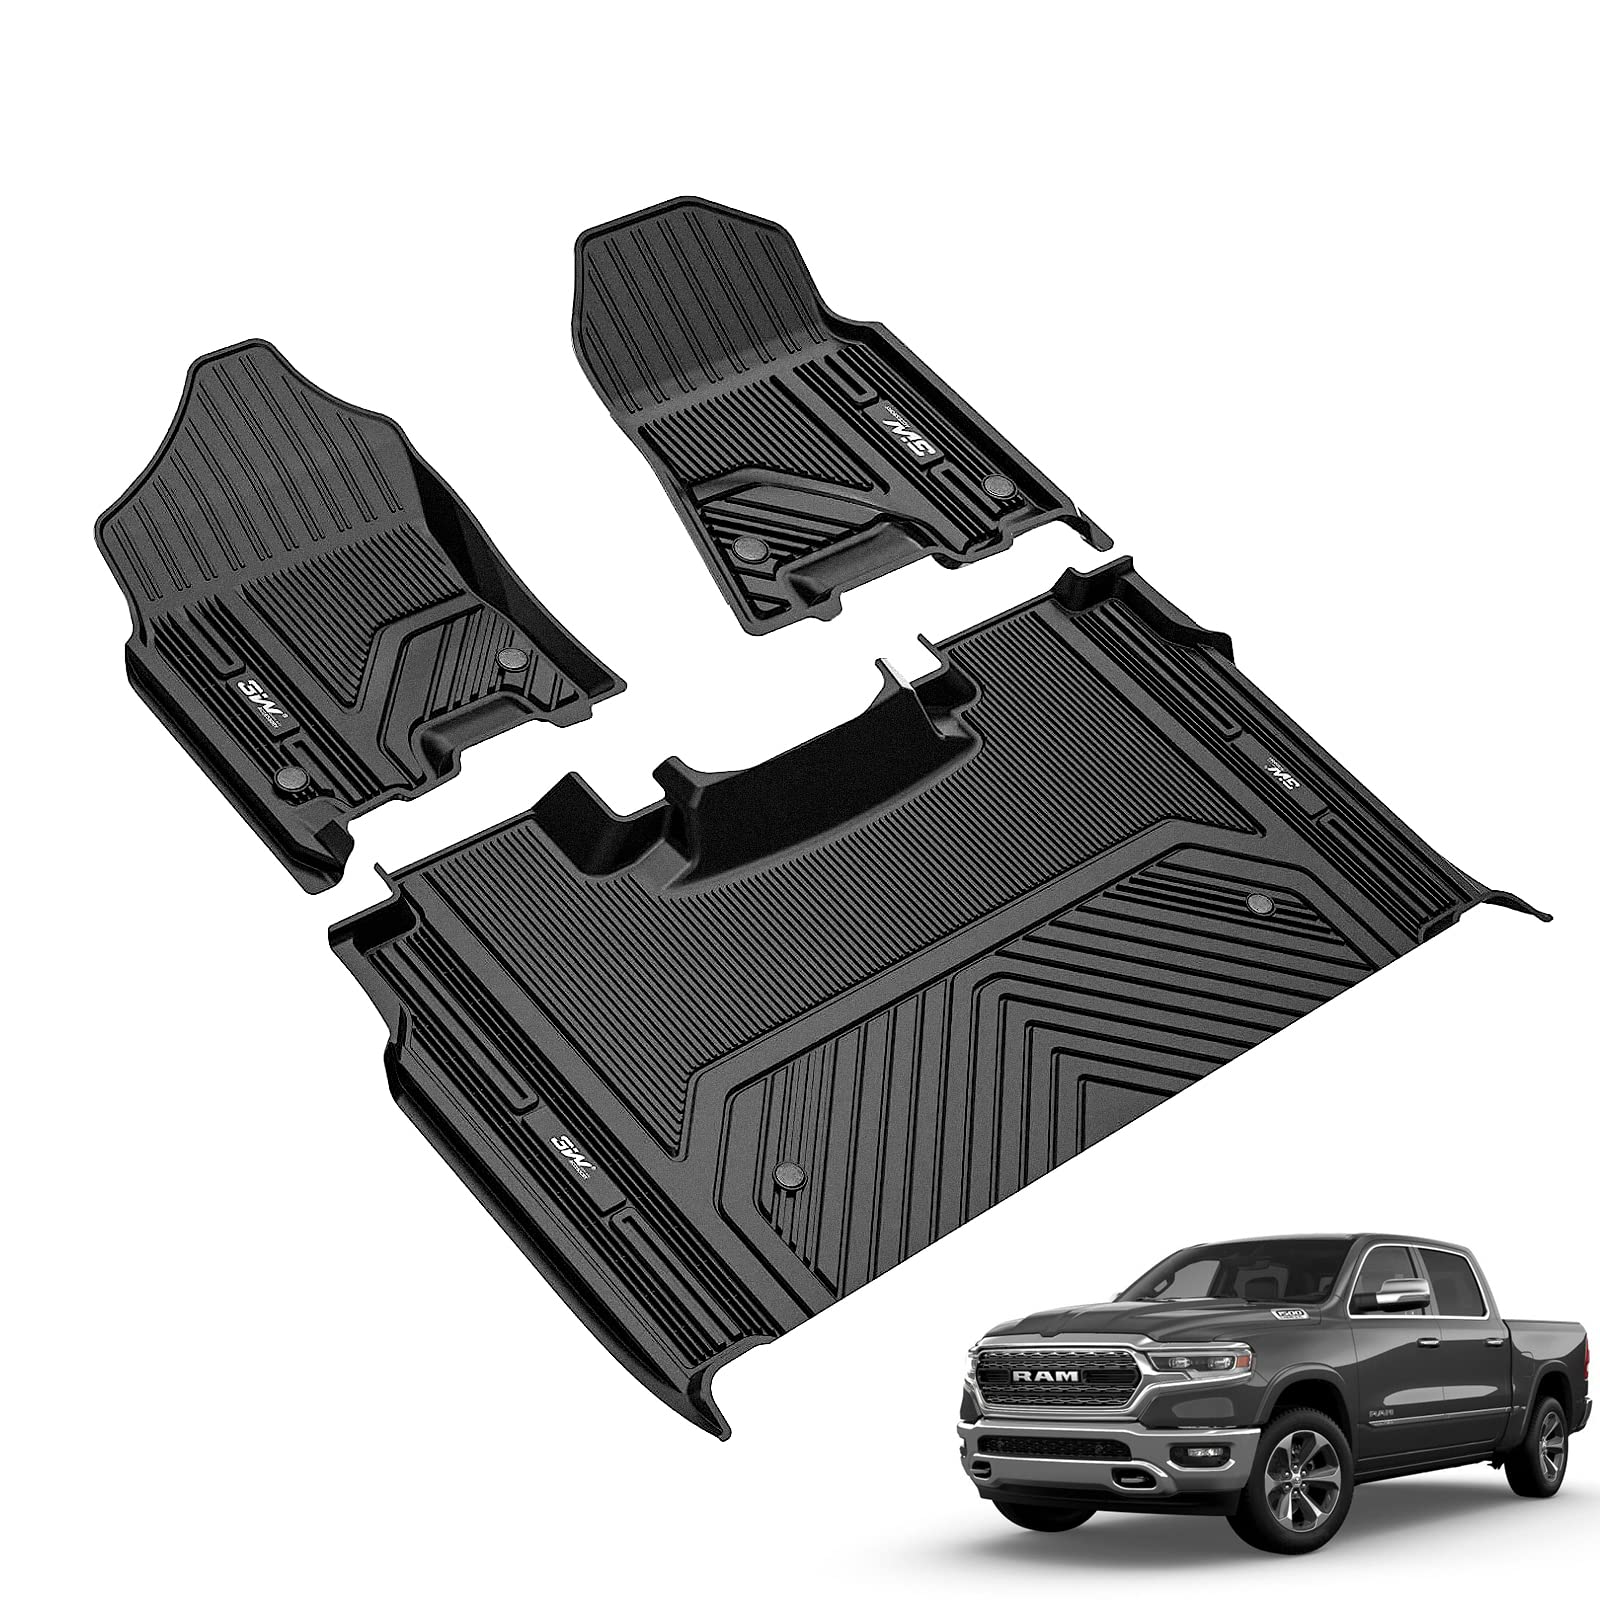 3W Dodge Ram 1500 2019-2024 New Body (NOT Classic Models) Custom Floor Mats TPE Material & All-Weather Protection Vehicles & Parts 3Wliners 2019-2024 With Underseat Storage 1st&2nd Row Mats